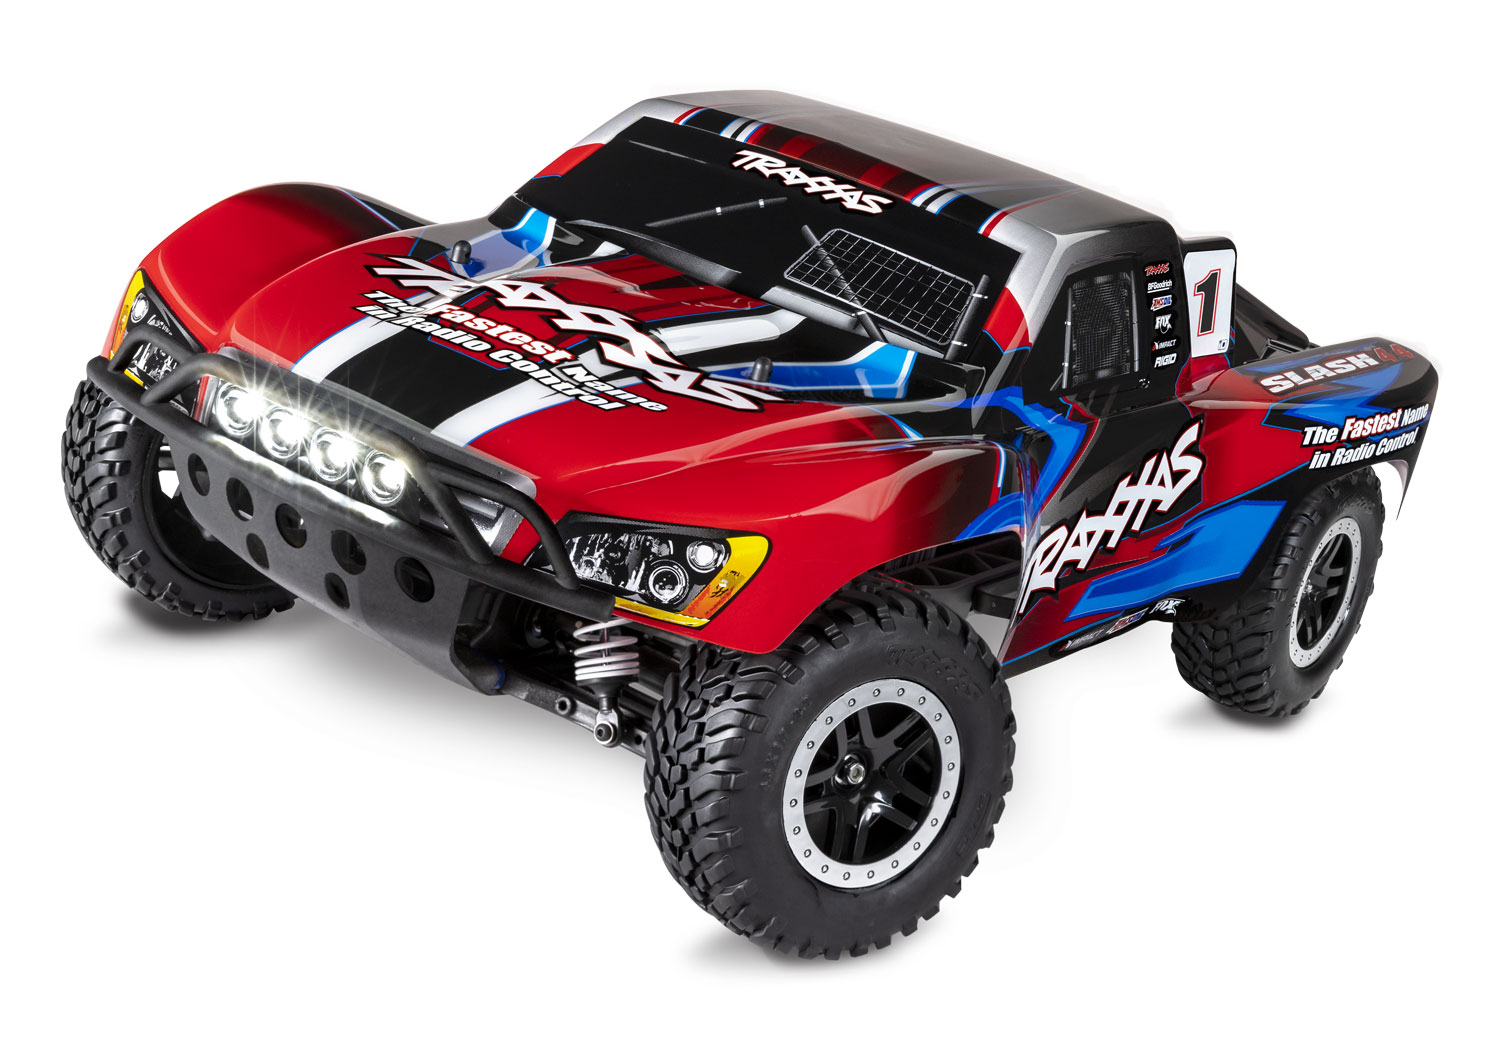 Traxxas Slash 4x4 XL5 4WD short course truck RTR 2.4Ghz met LED verlichting inclusief Power Pack - Rood